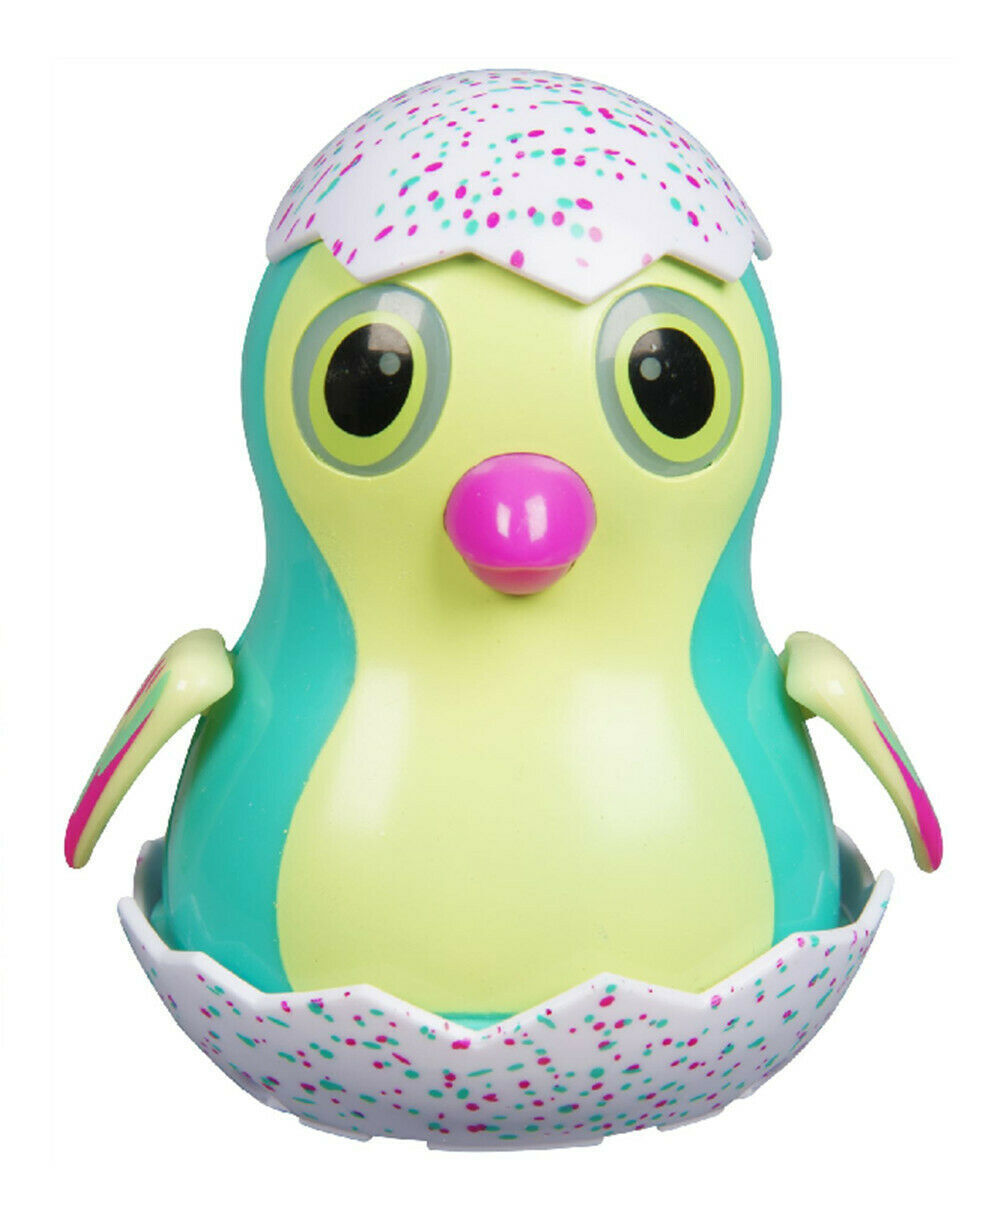 Hatchimals Wind-Up Eggliders with Lights & Sound